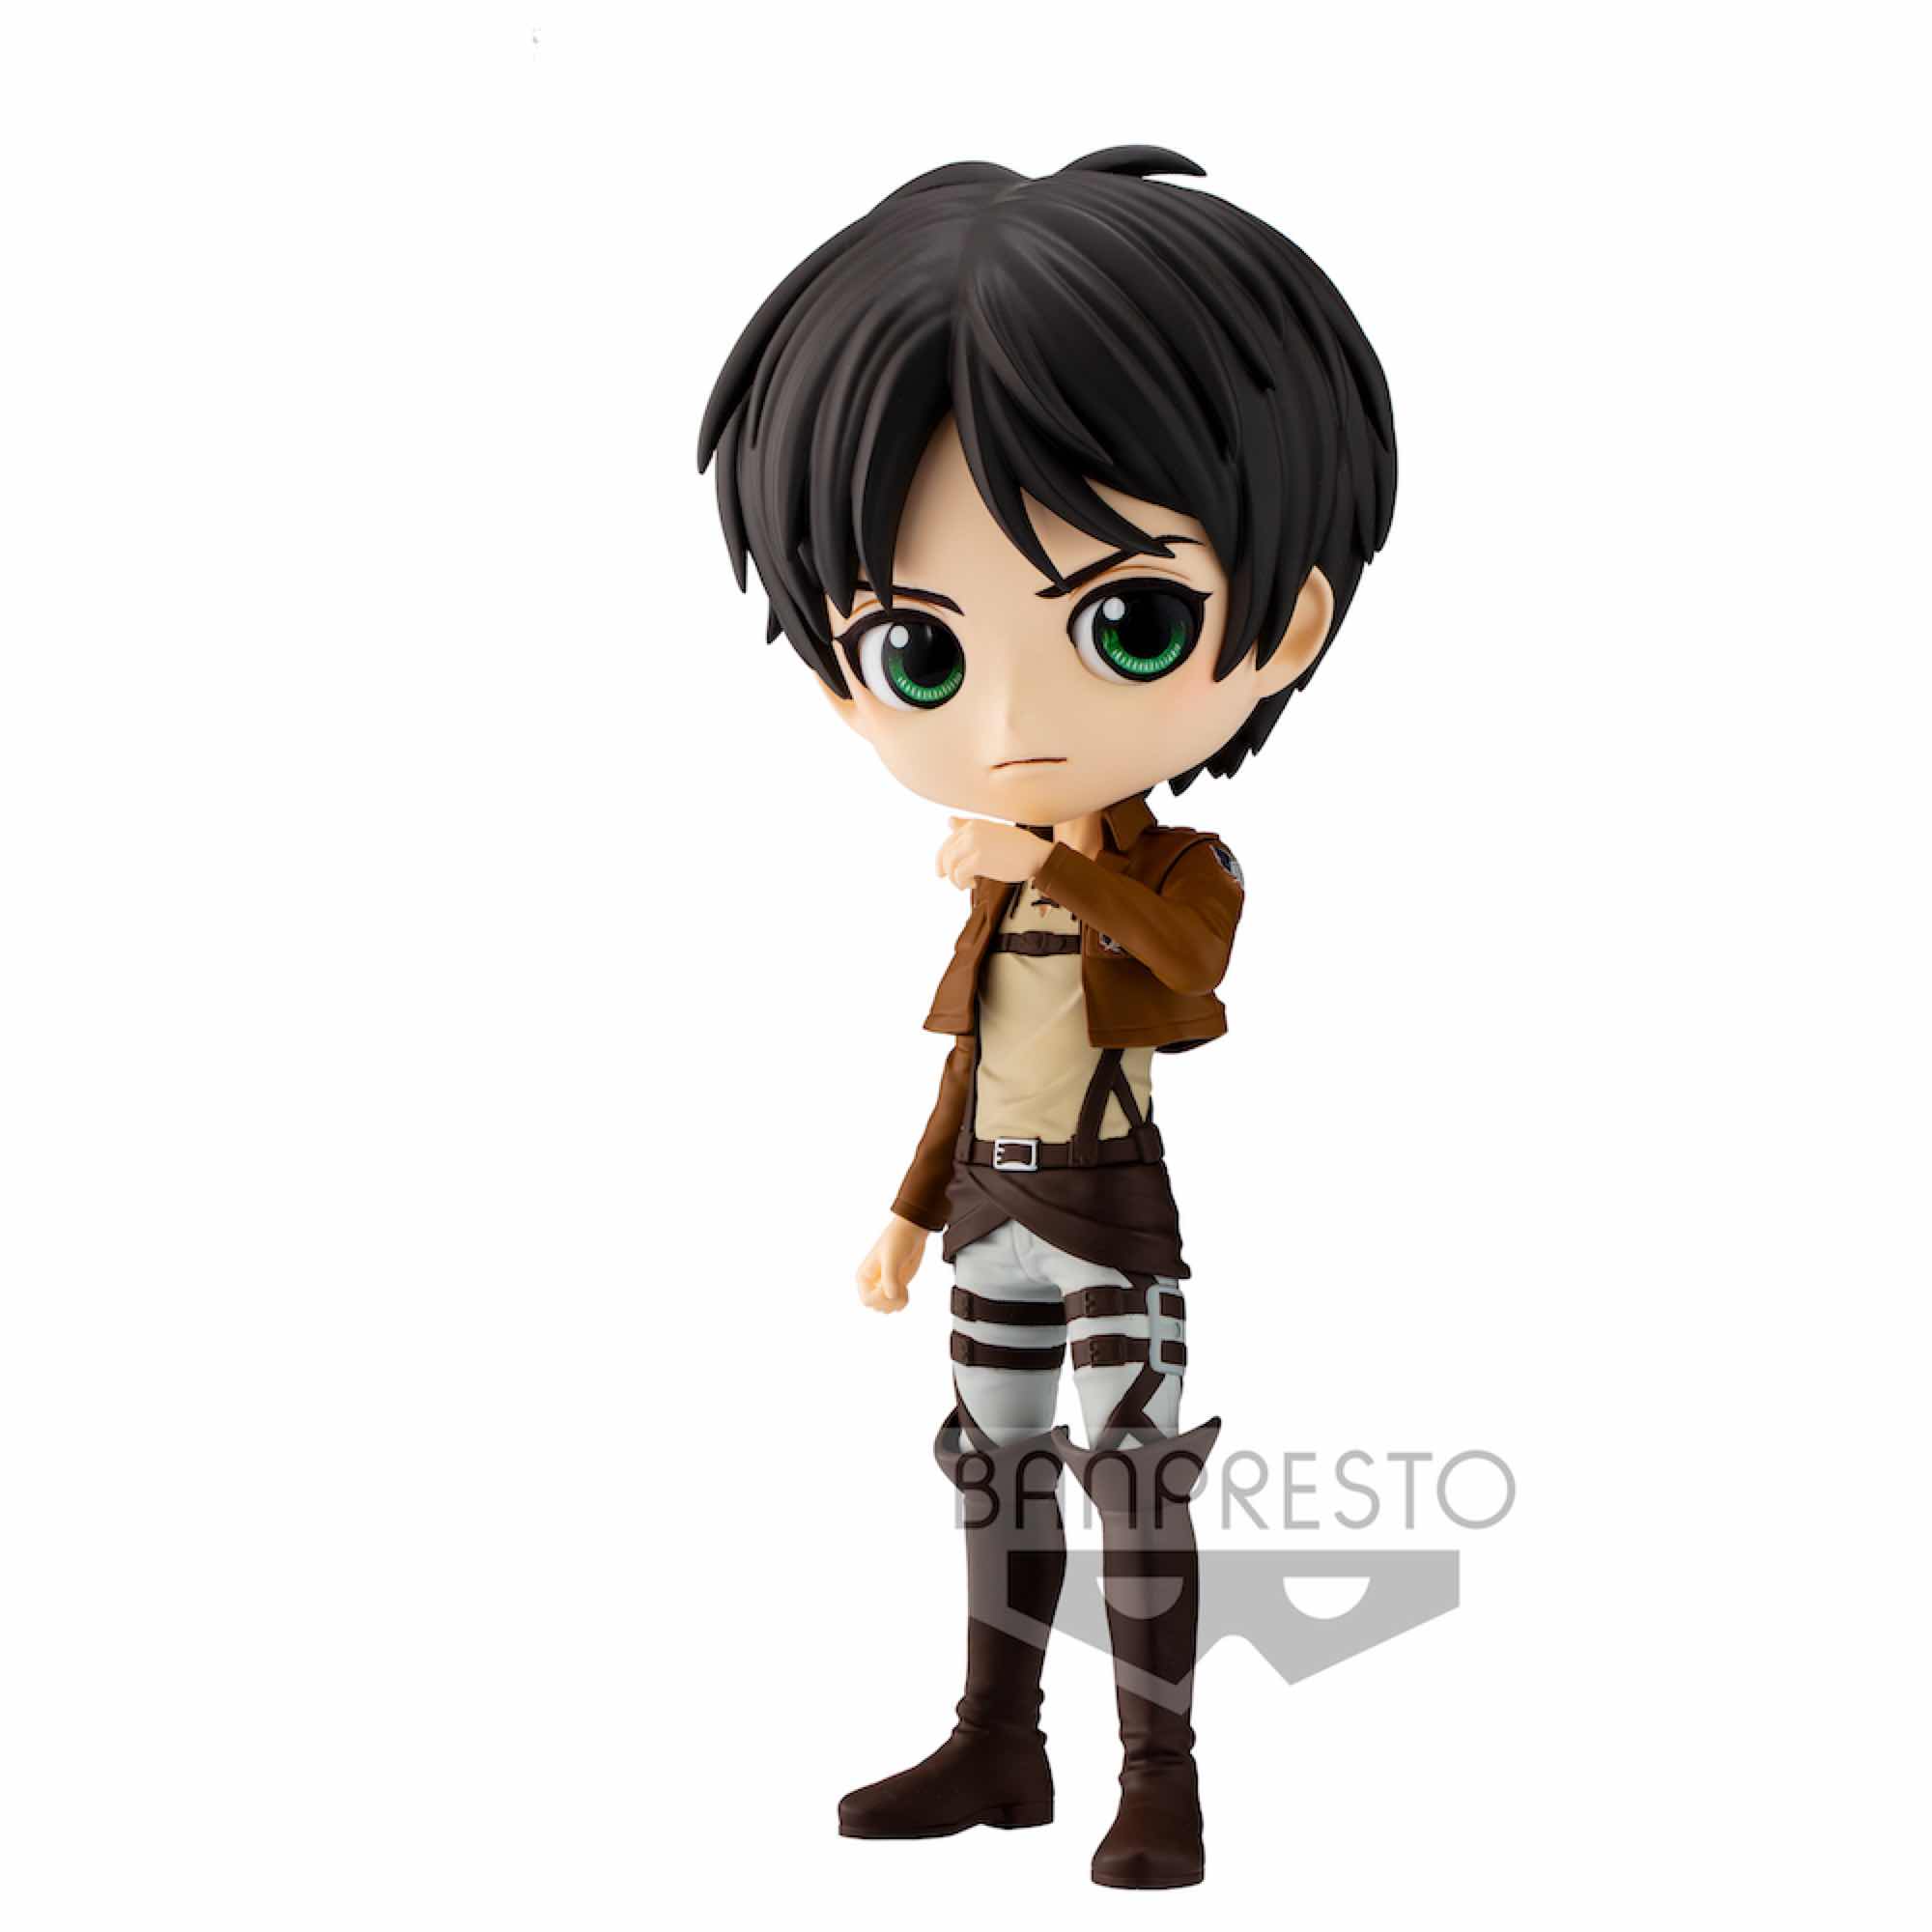 ATTACK ON TITAN QPOSKET EREN YEAGER "A"